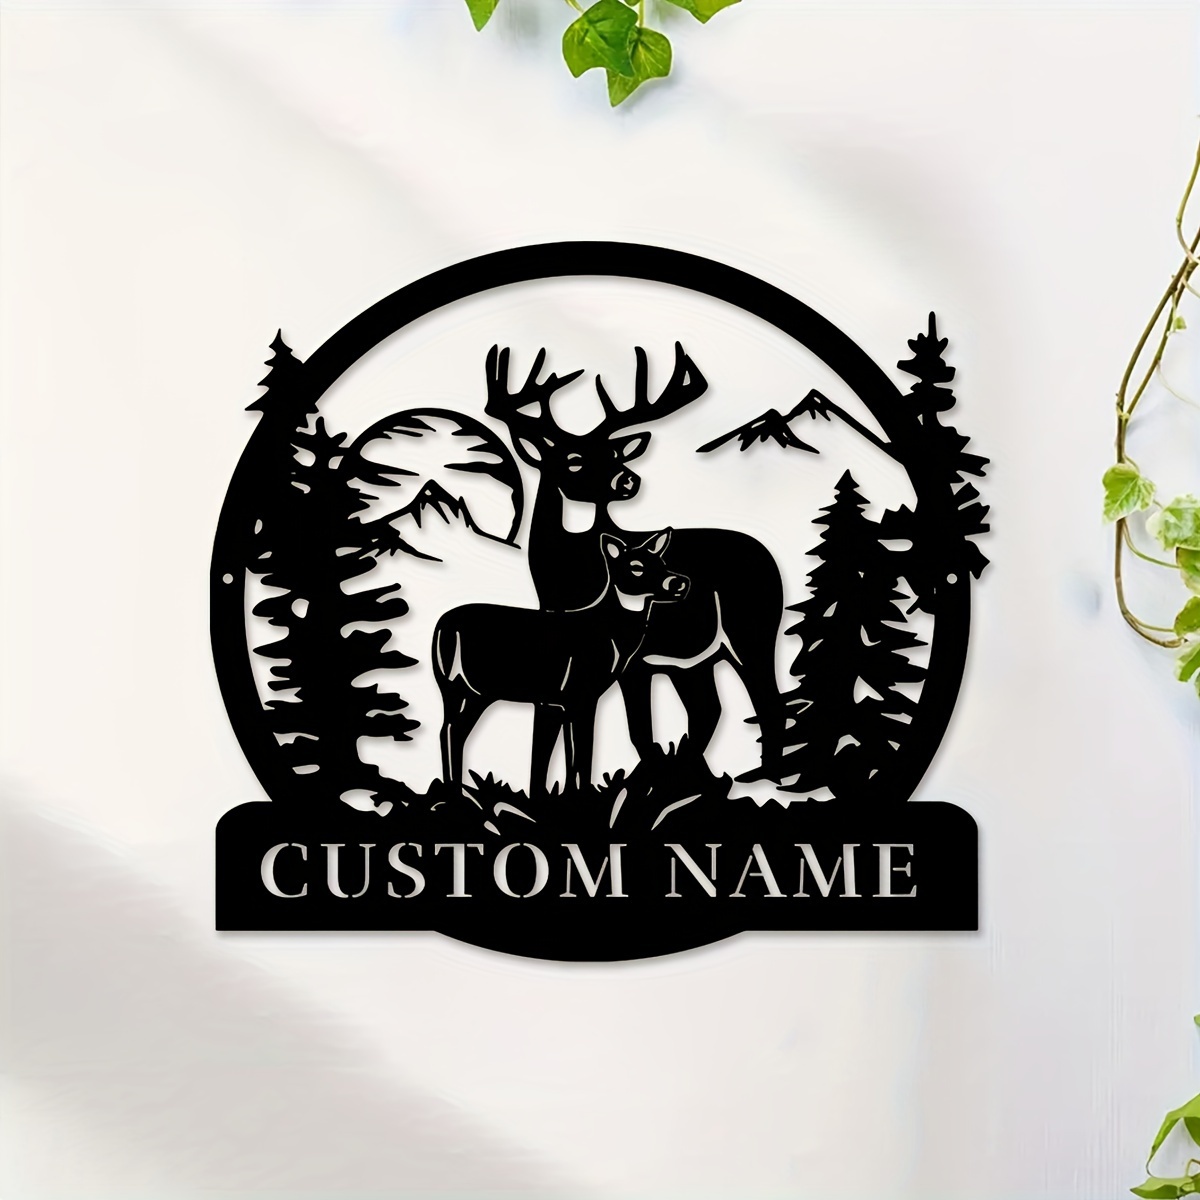 

1pc Custom Deer And Mountain Forest Wall Art, Personalised Sign, Farmhouse Deer And Mountain Forest Wall Decor, Living Room Living Room Office Decorative Metal Art, Custom Name, Porch, Patio, Gift